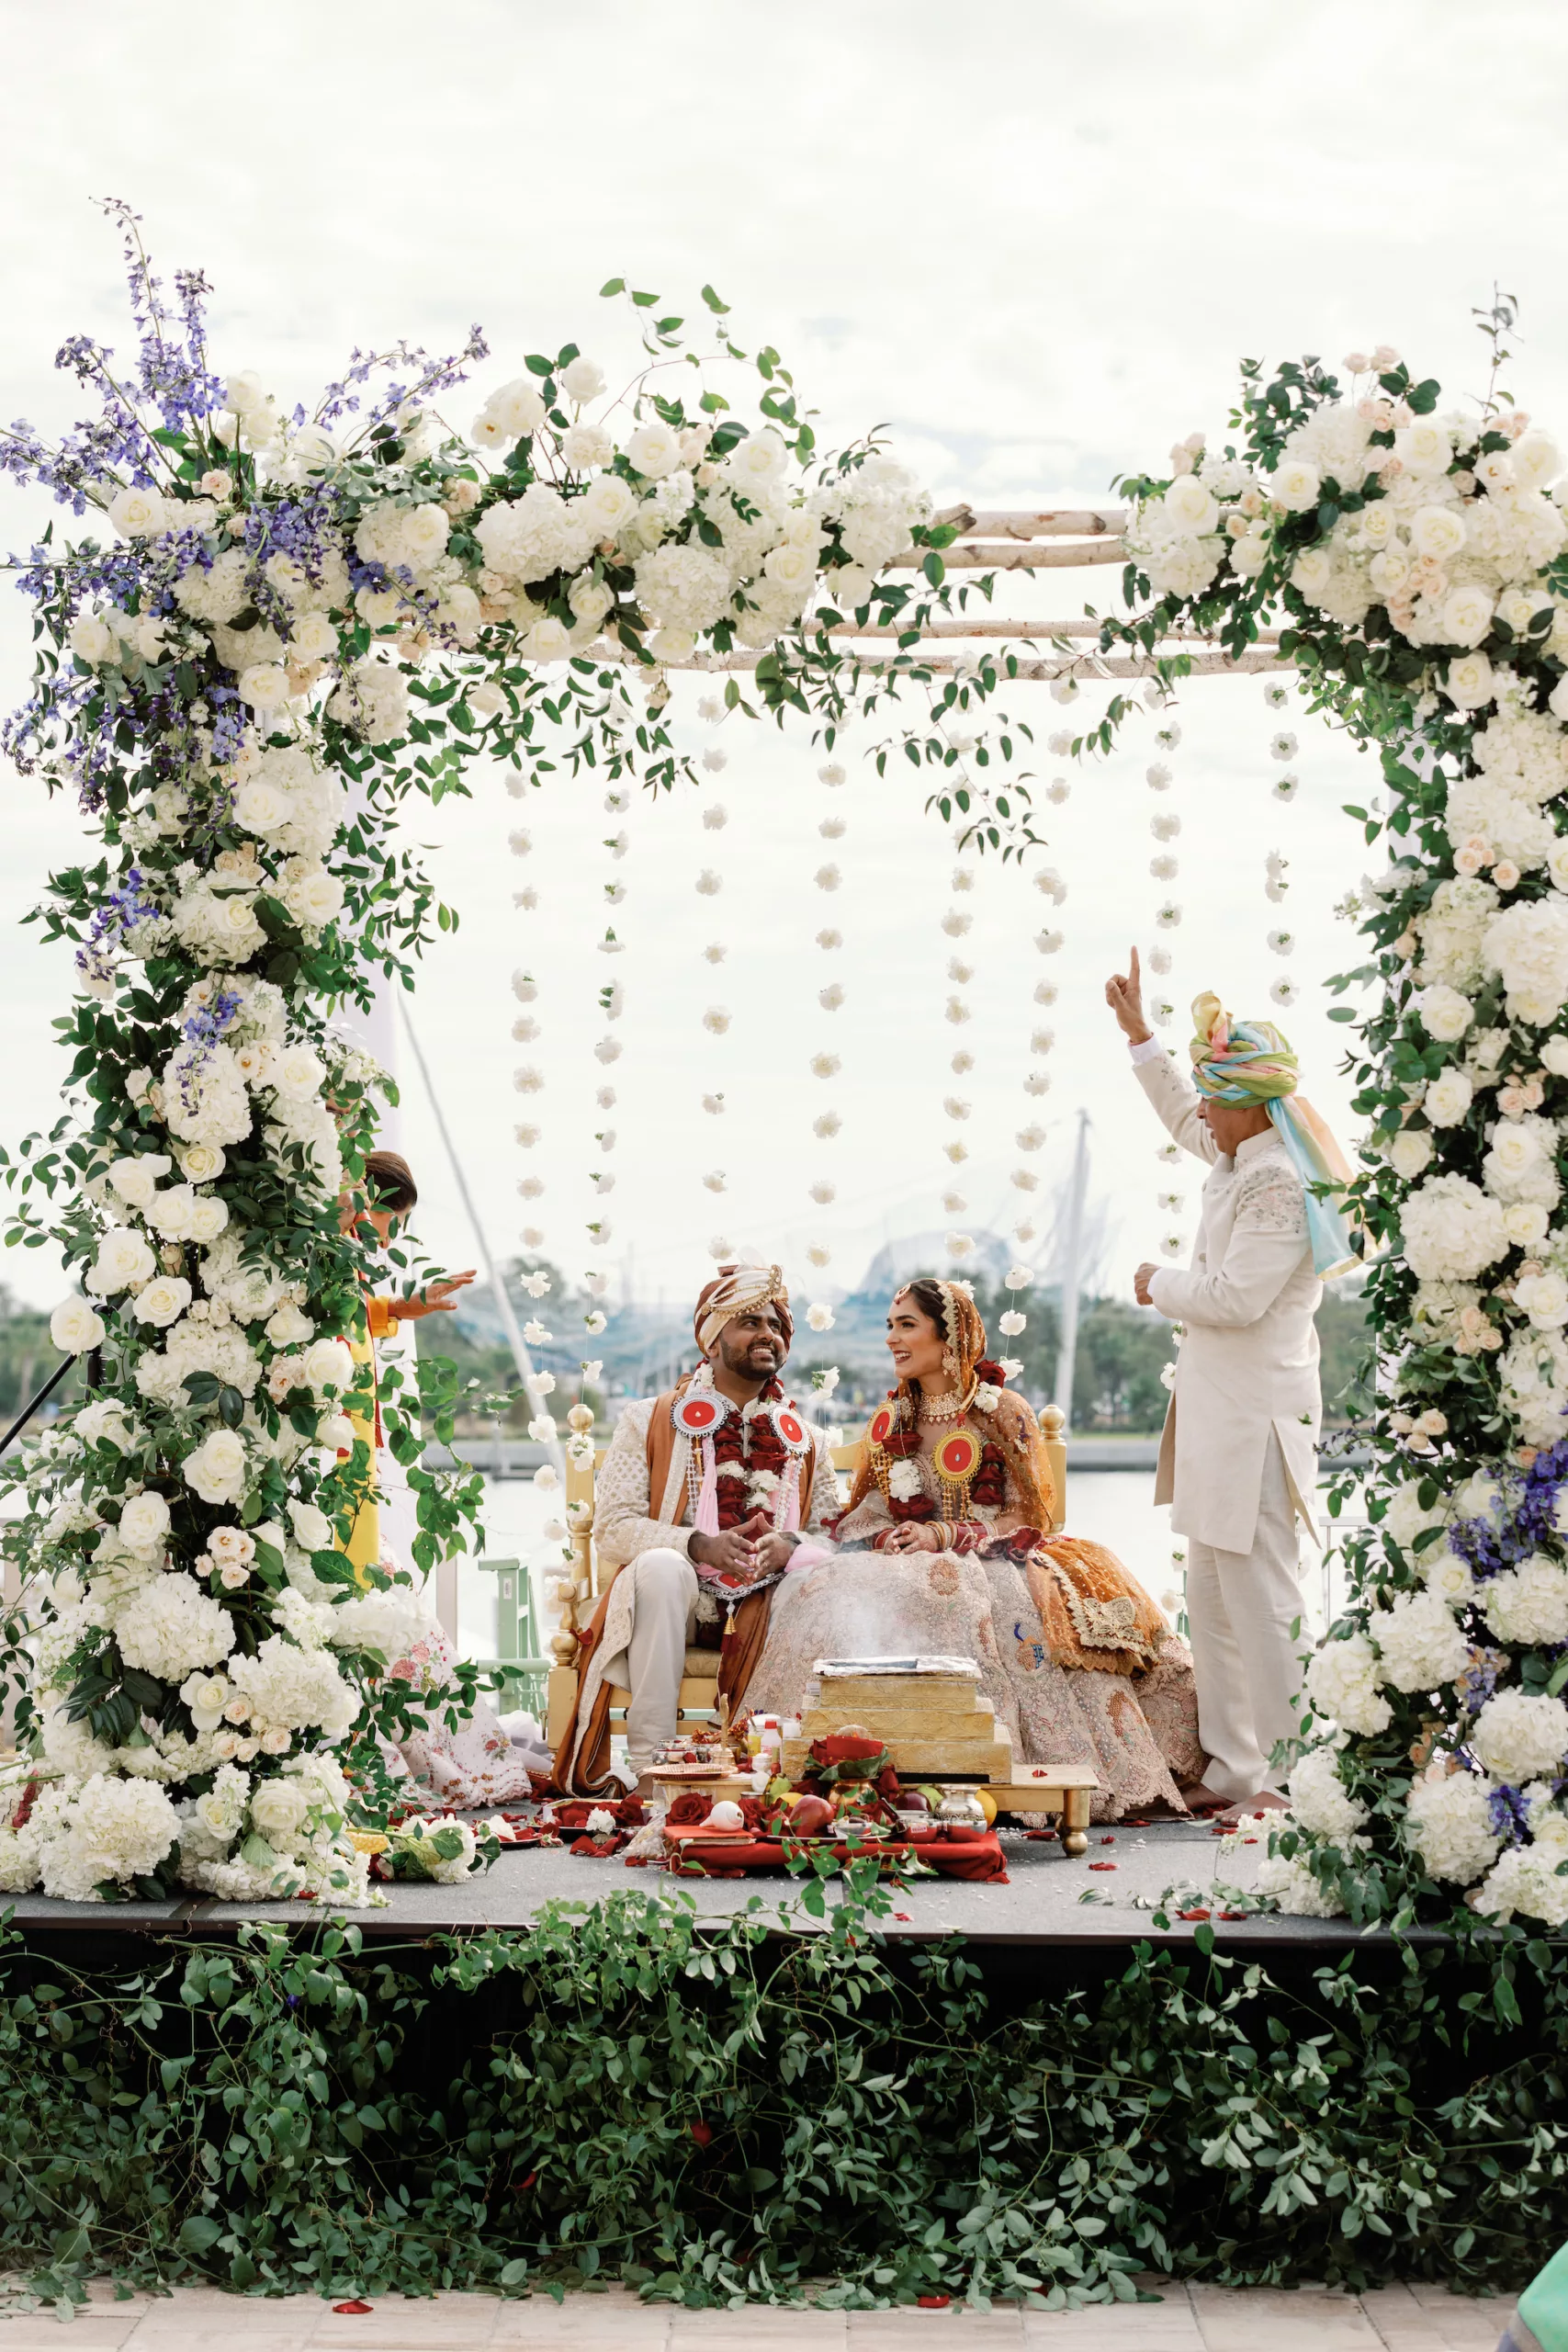 Luxurious Hindu Wedding Ceremony Decor Ideas | Elegant Floral Arch with White Roses, Hydrangeas, and Greenery Flower Arrangement Inspiration | St Pete Event Planner Coastal Coordinating